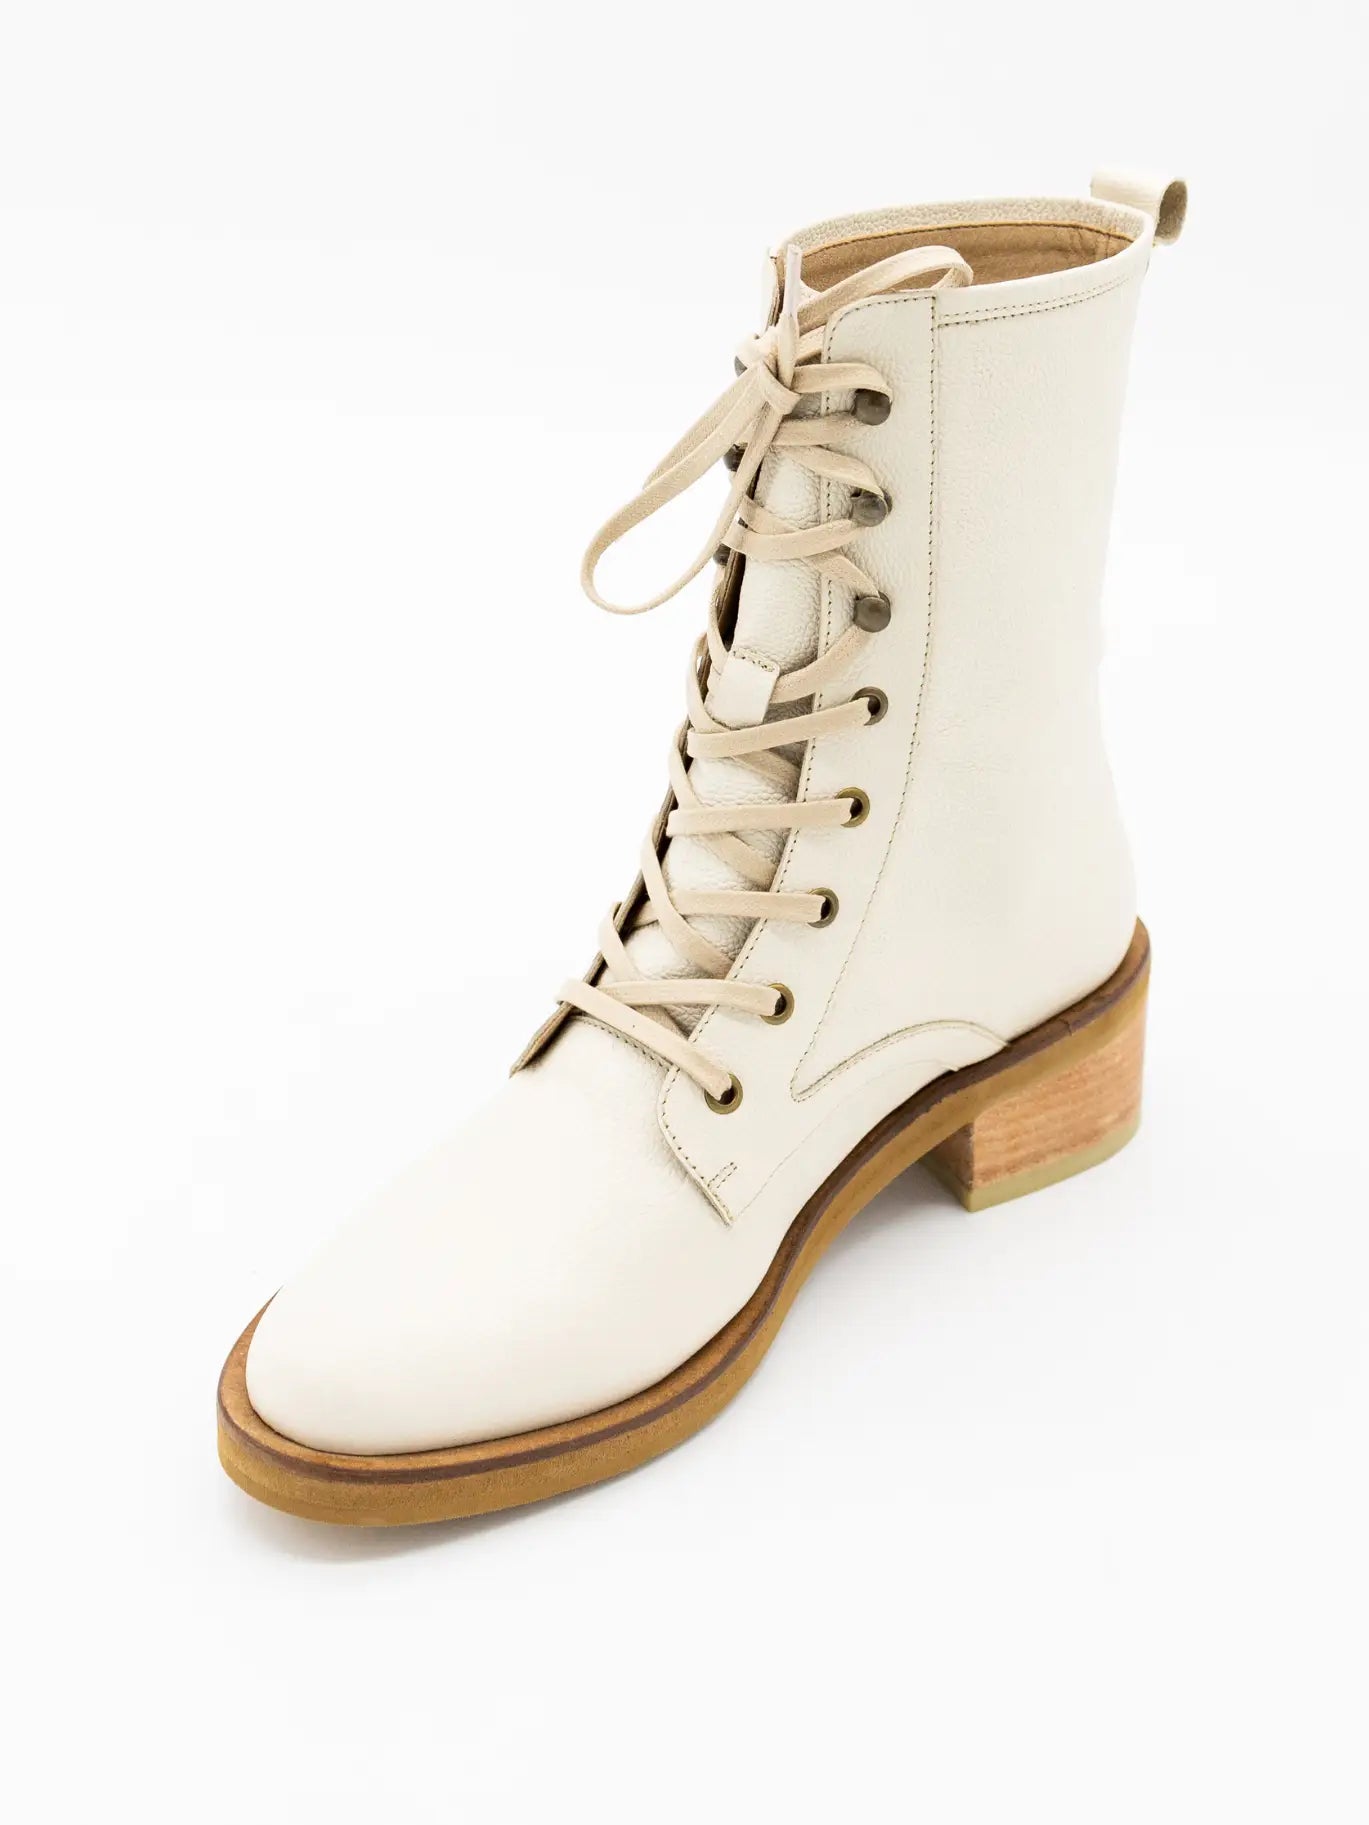 YUHUP COMBAT BOOTS - IVORY LEATHER